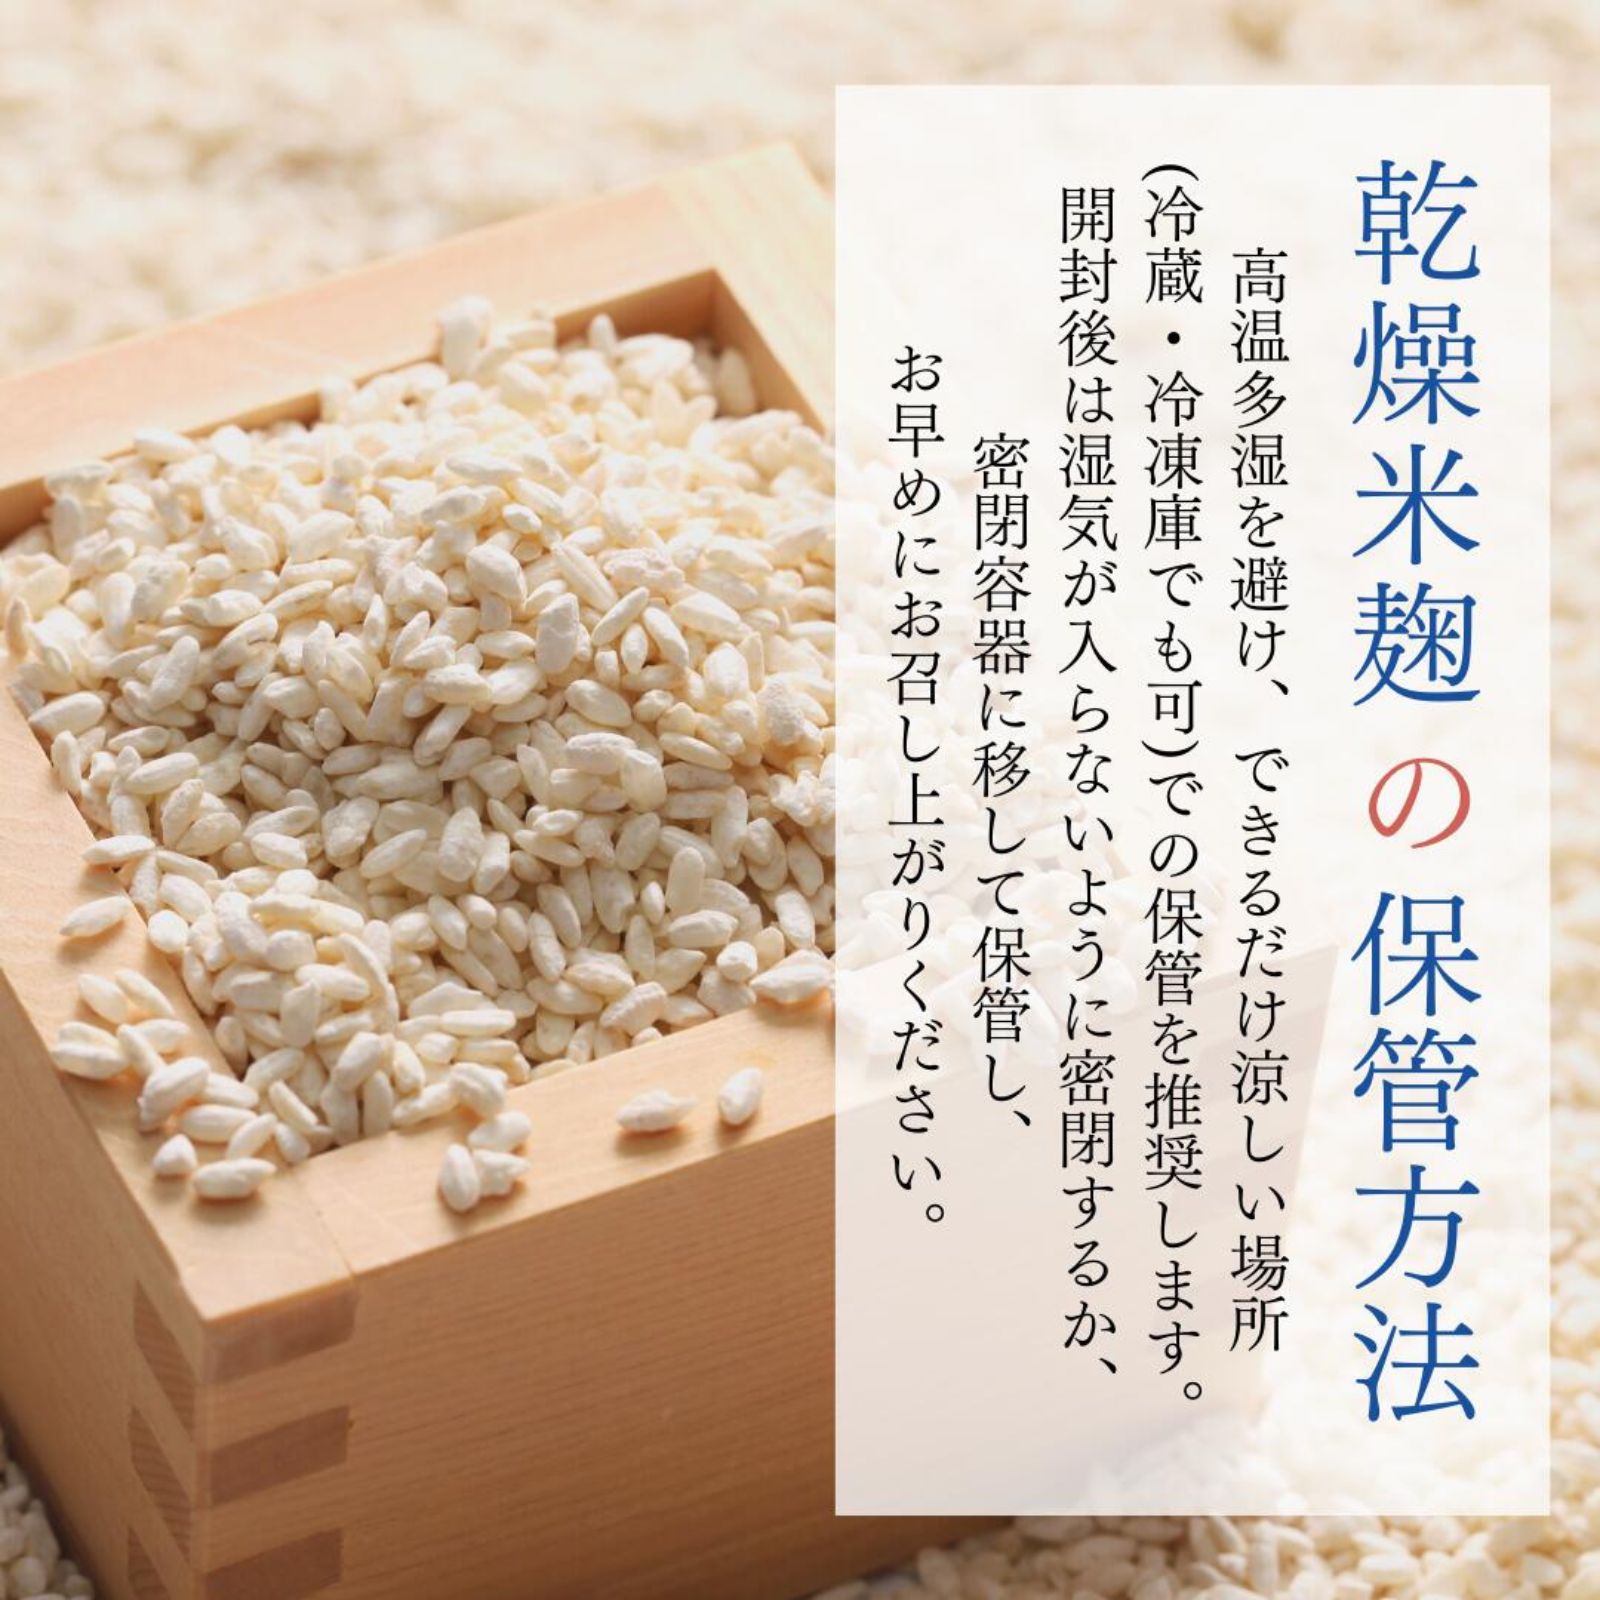 o Rize dry rice .1.6kg less pesticide domestic production no addition rice .. handmade salt . soy sauce . taste . making sweet sake amazake ... dry .. rice field commercial firm navy blue label 